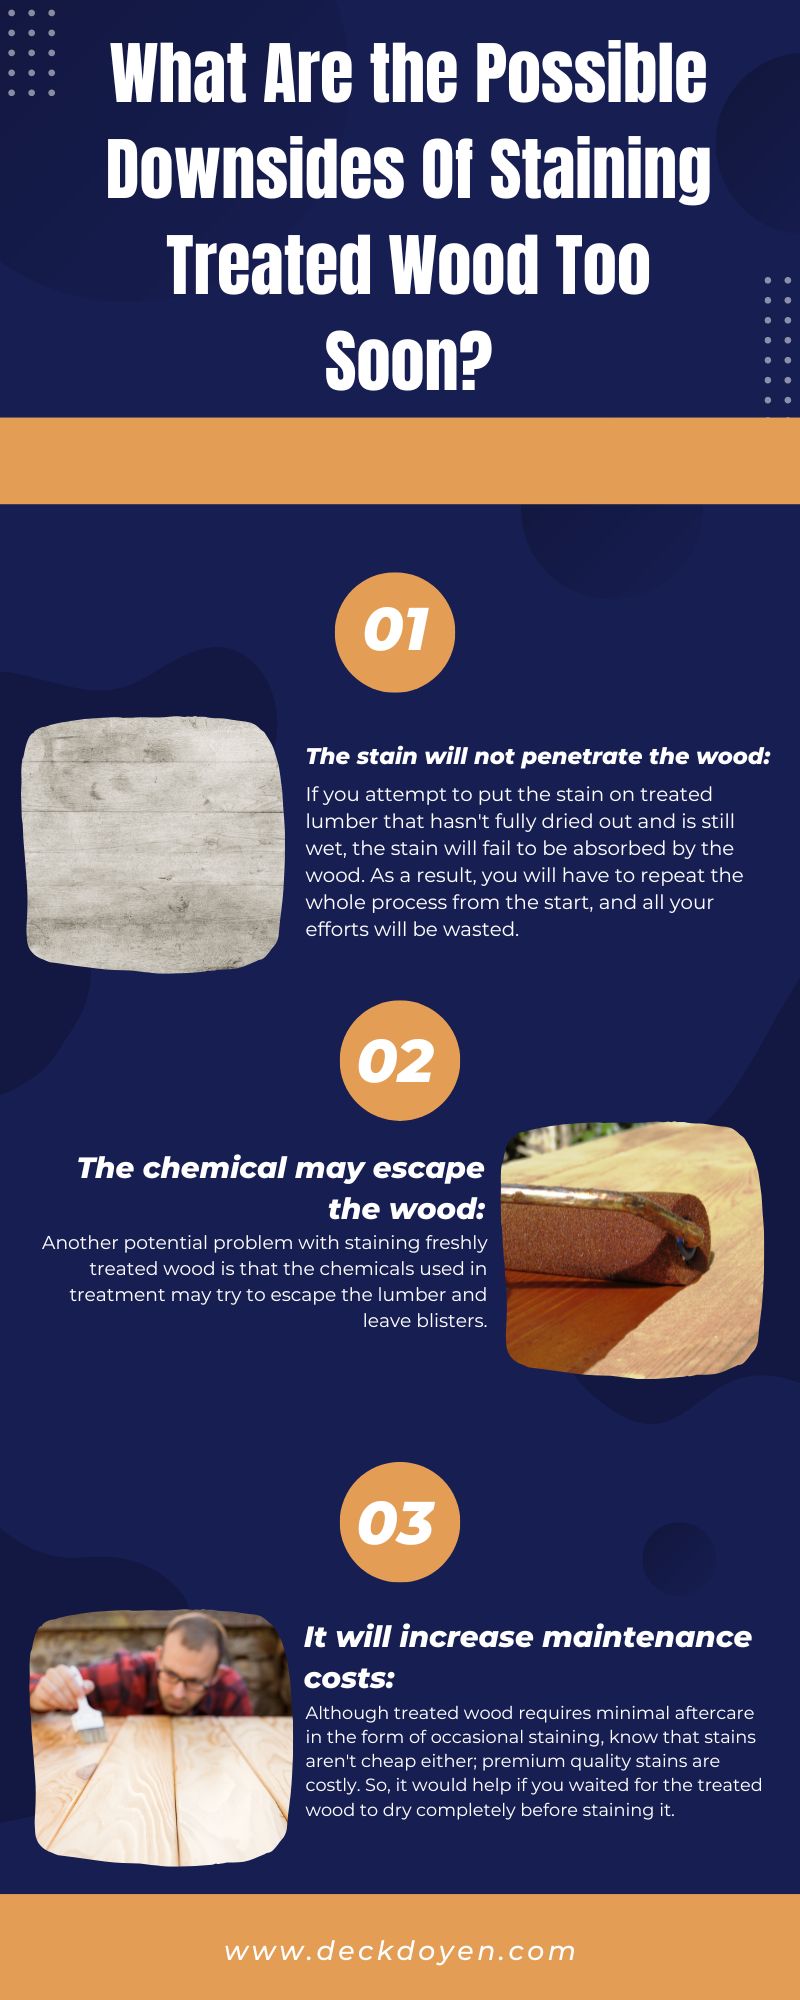 What Are the Possible Downsides Of Staining Treated Wood Too Soon